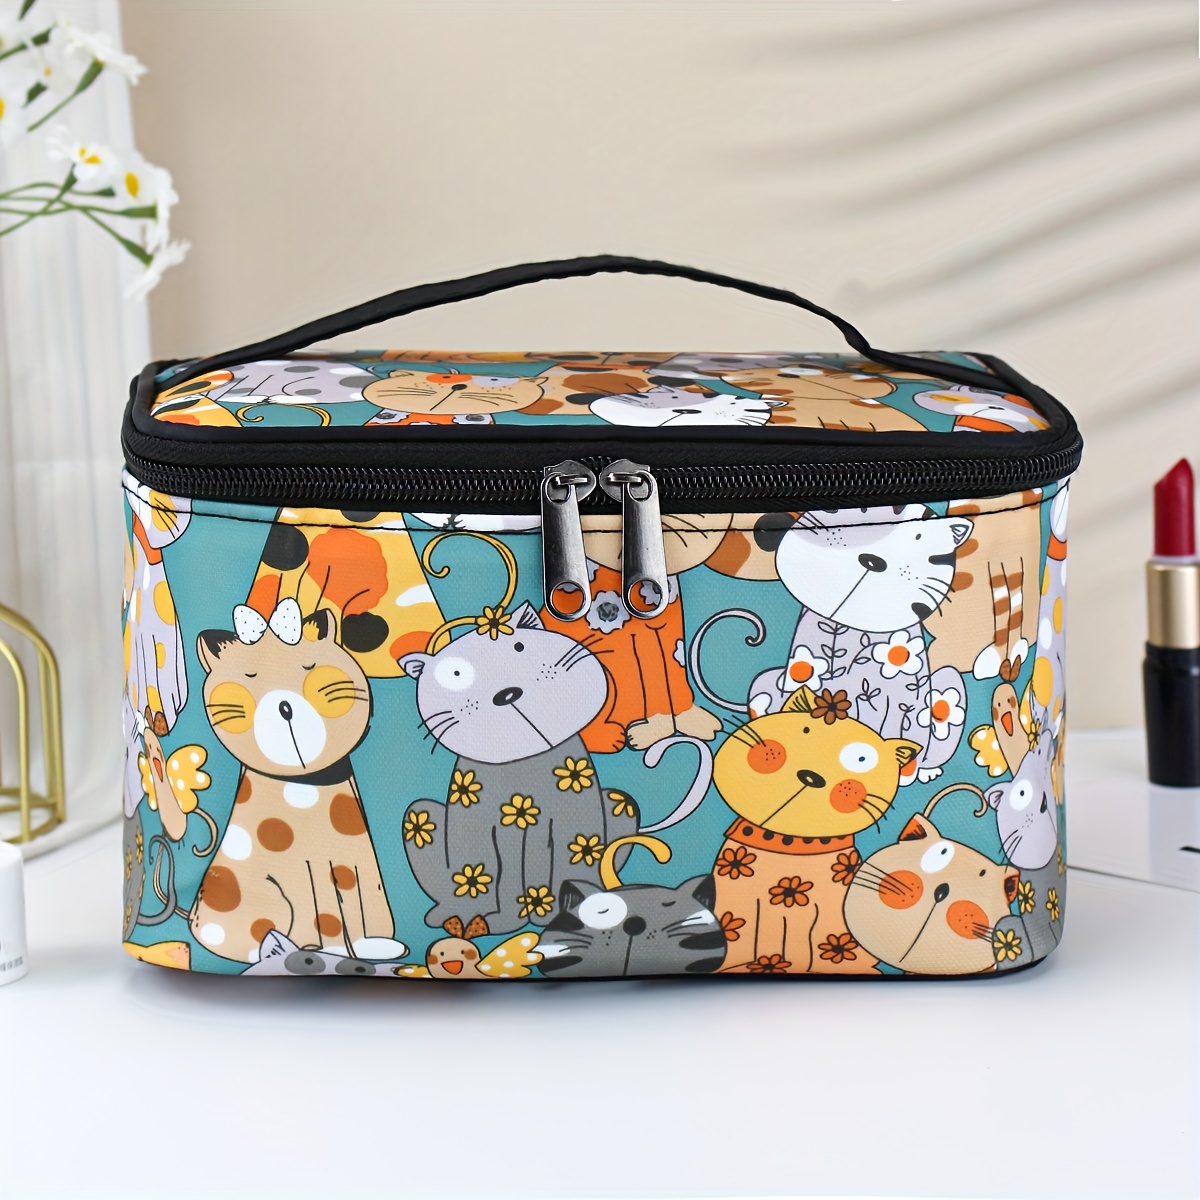 

Whimsical Kitty Cosmetics Case: Large, Waterproof, And Adorable - Perfect For Your Makeup Essentials